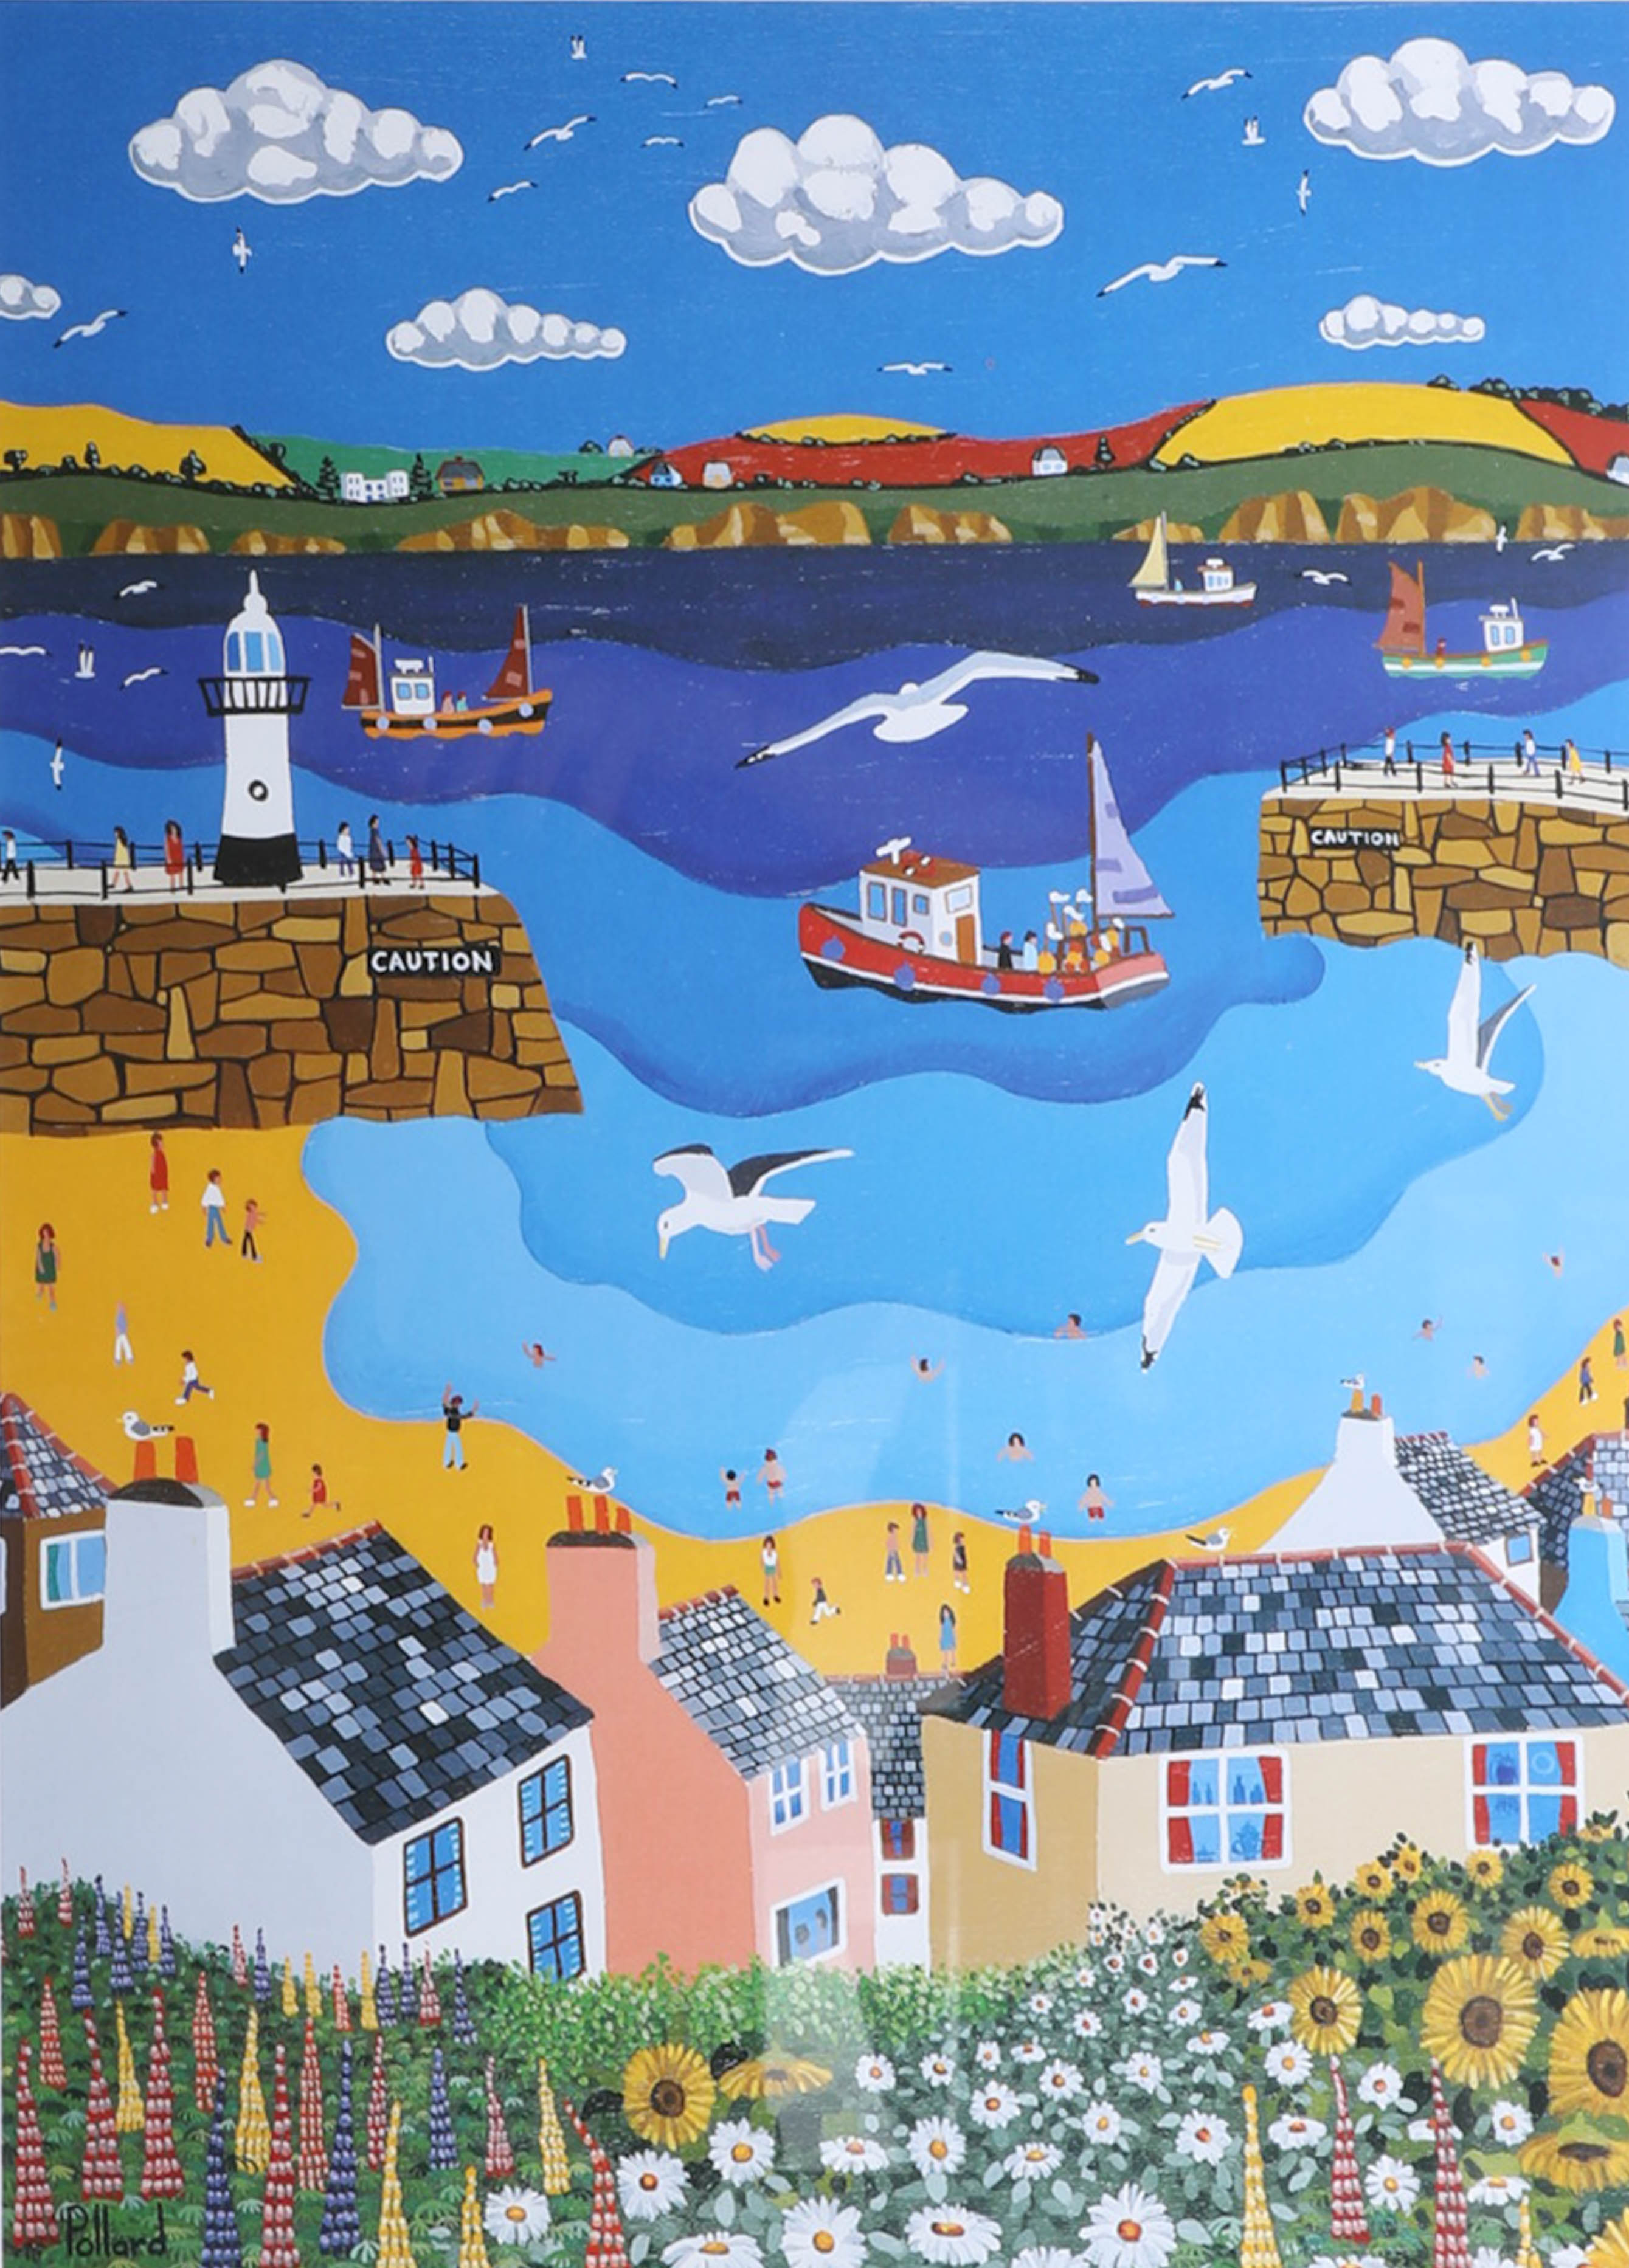 Brian Pollard open print, 'Mousehole', with remarque, signed, framed and glazed, 42cm x 30cm.